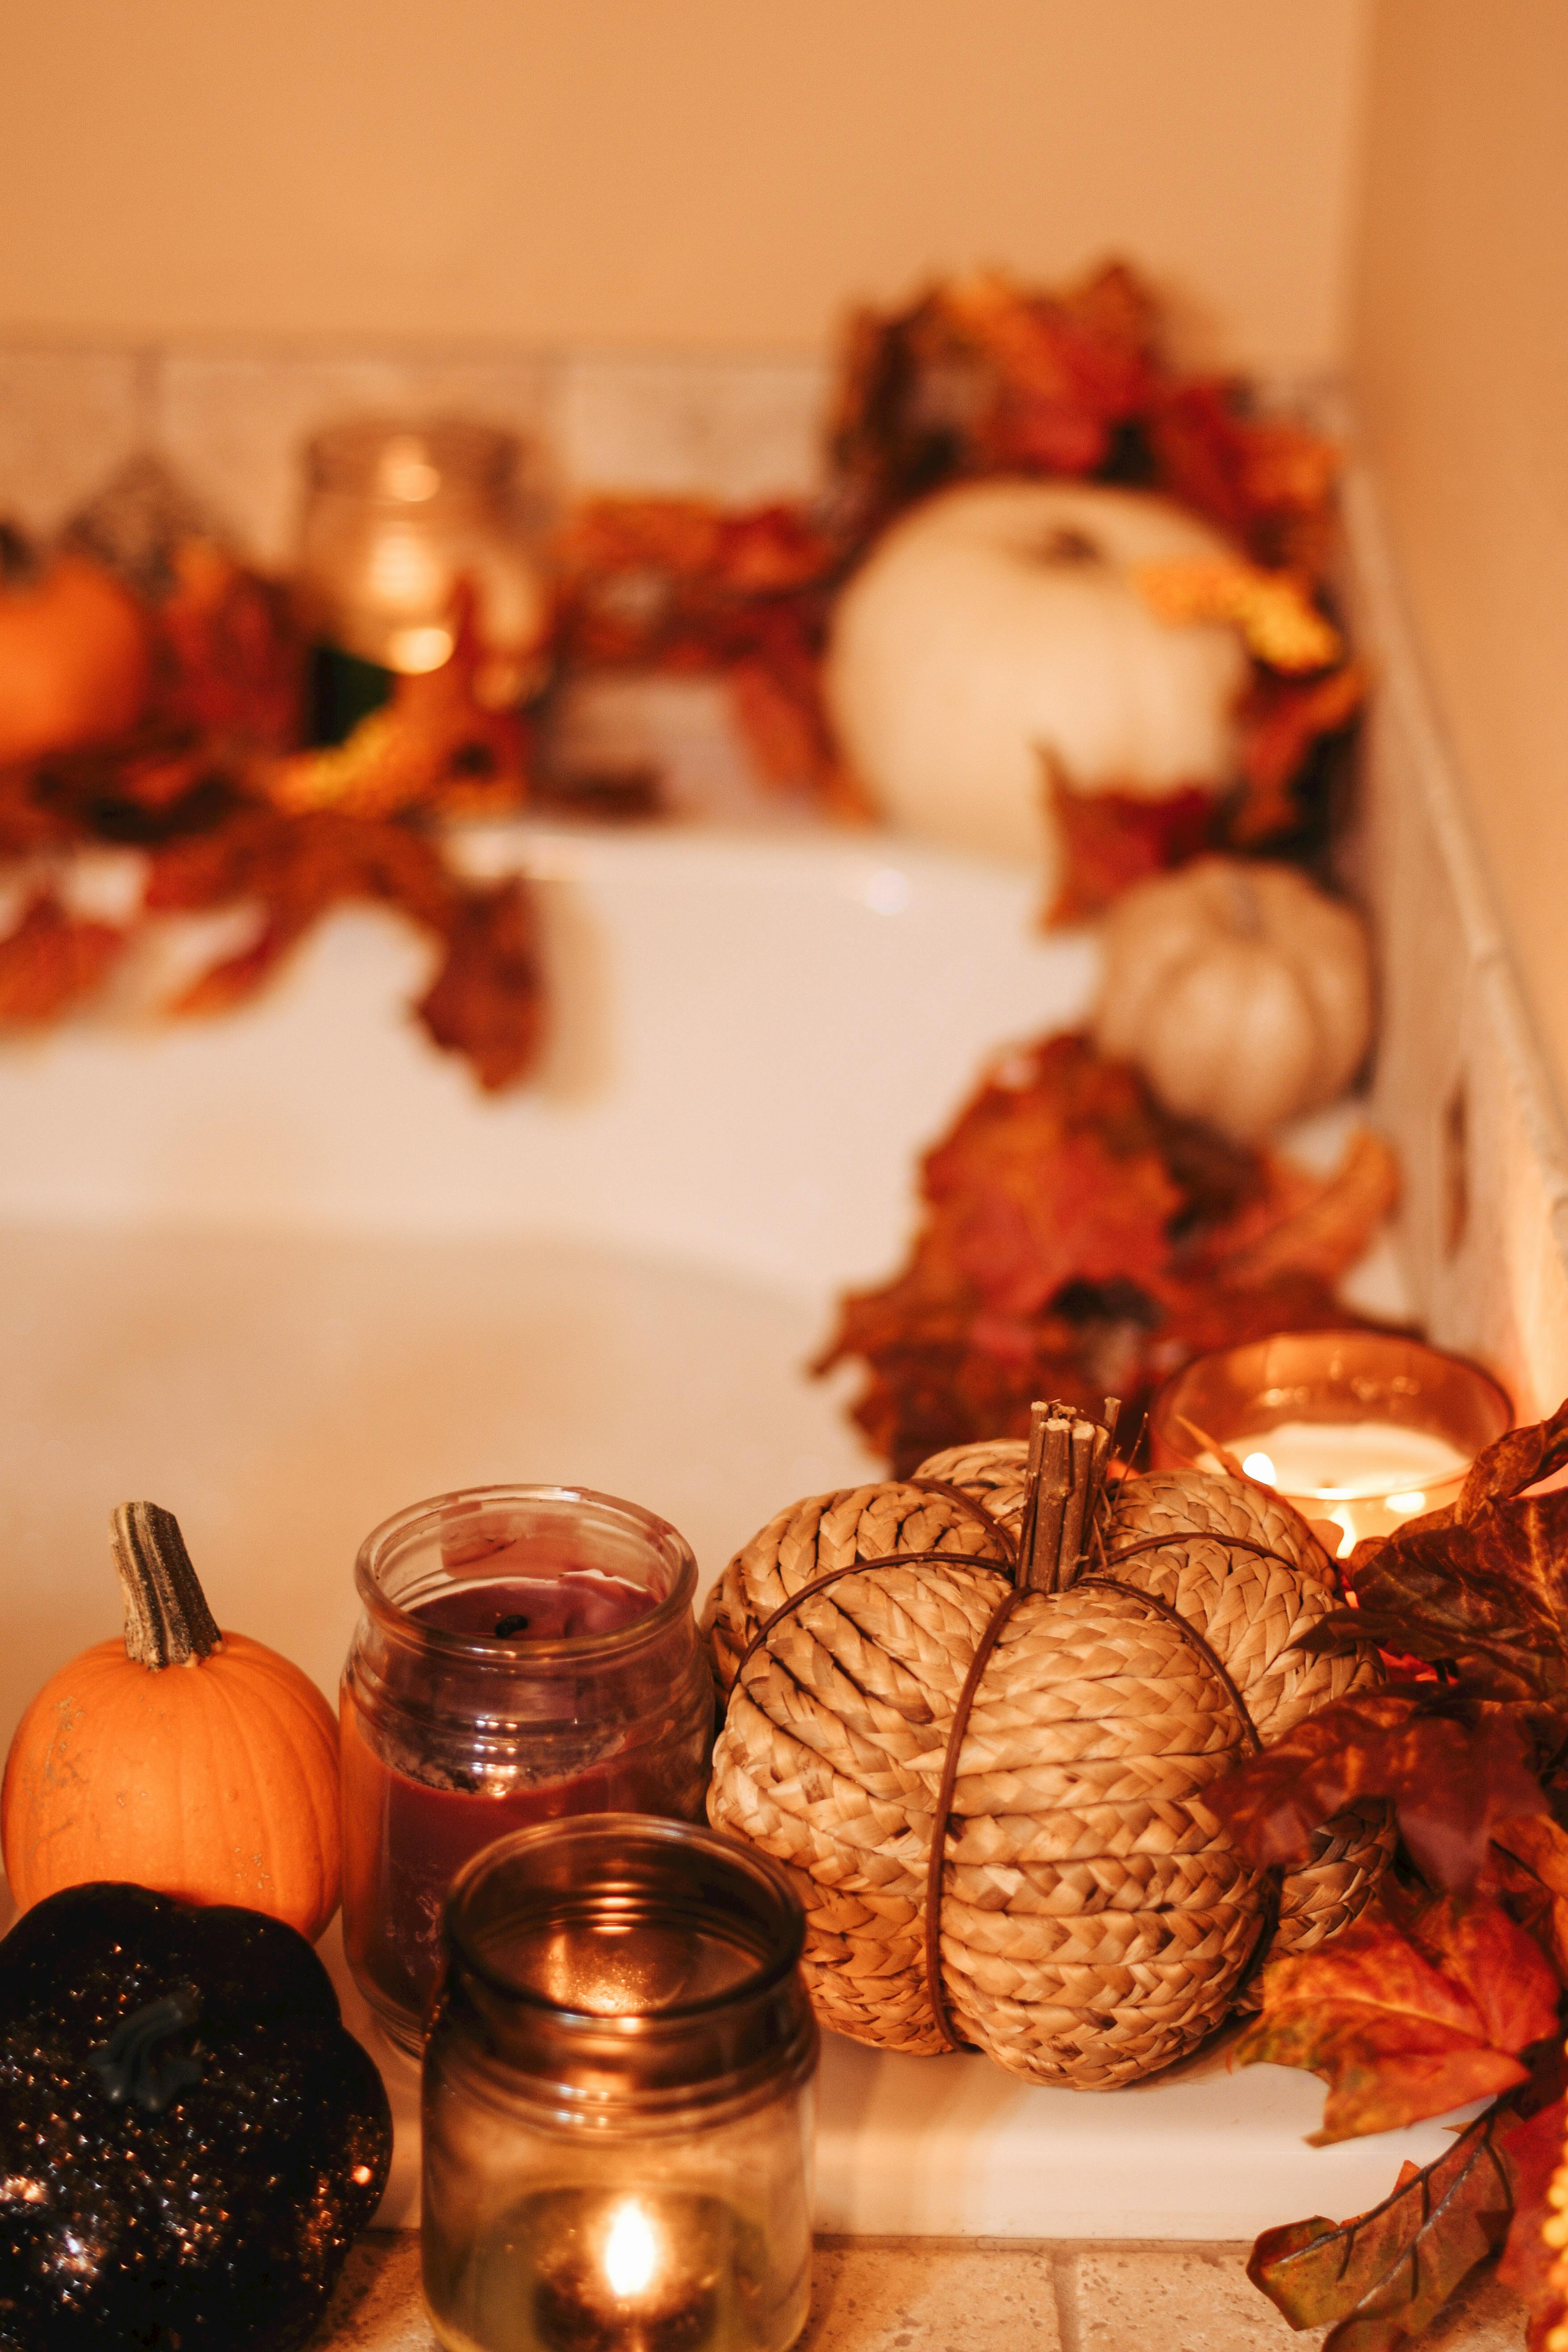 A bathroom decorated with leaves and candles | Source: Pexels